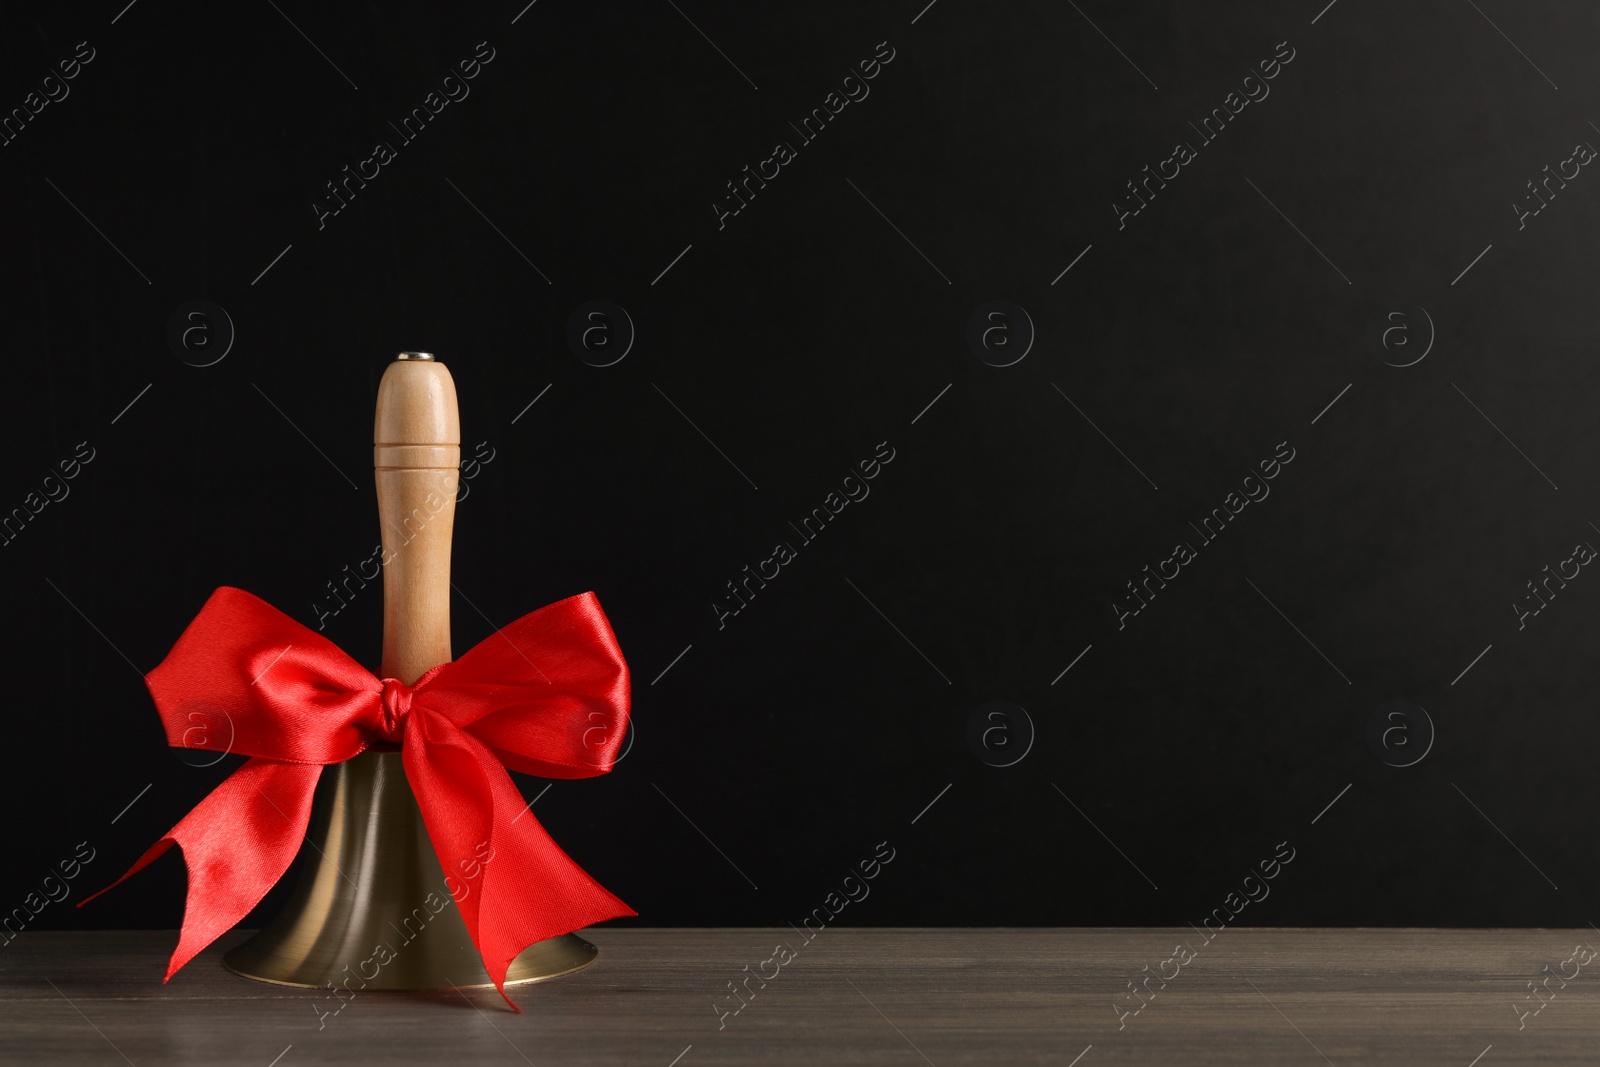 Photo of Golden bell with red bow on wooden table near blackboard, space for text. School days